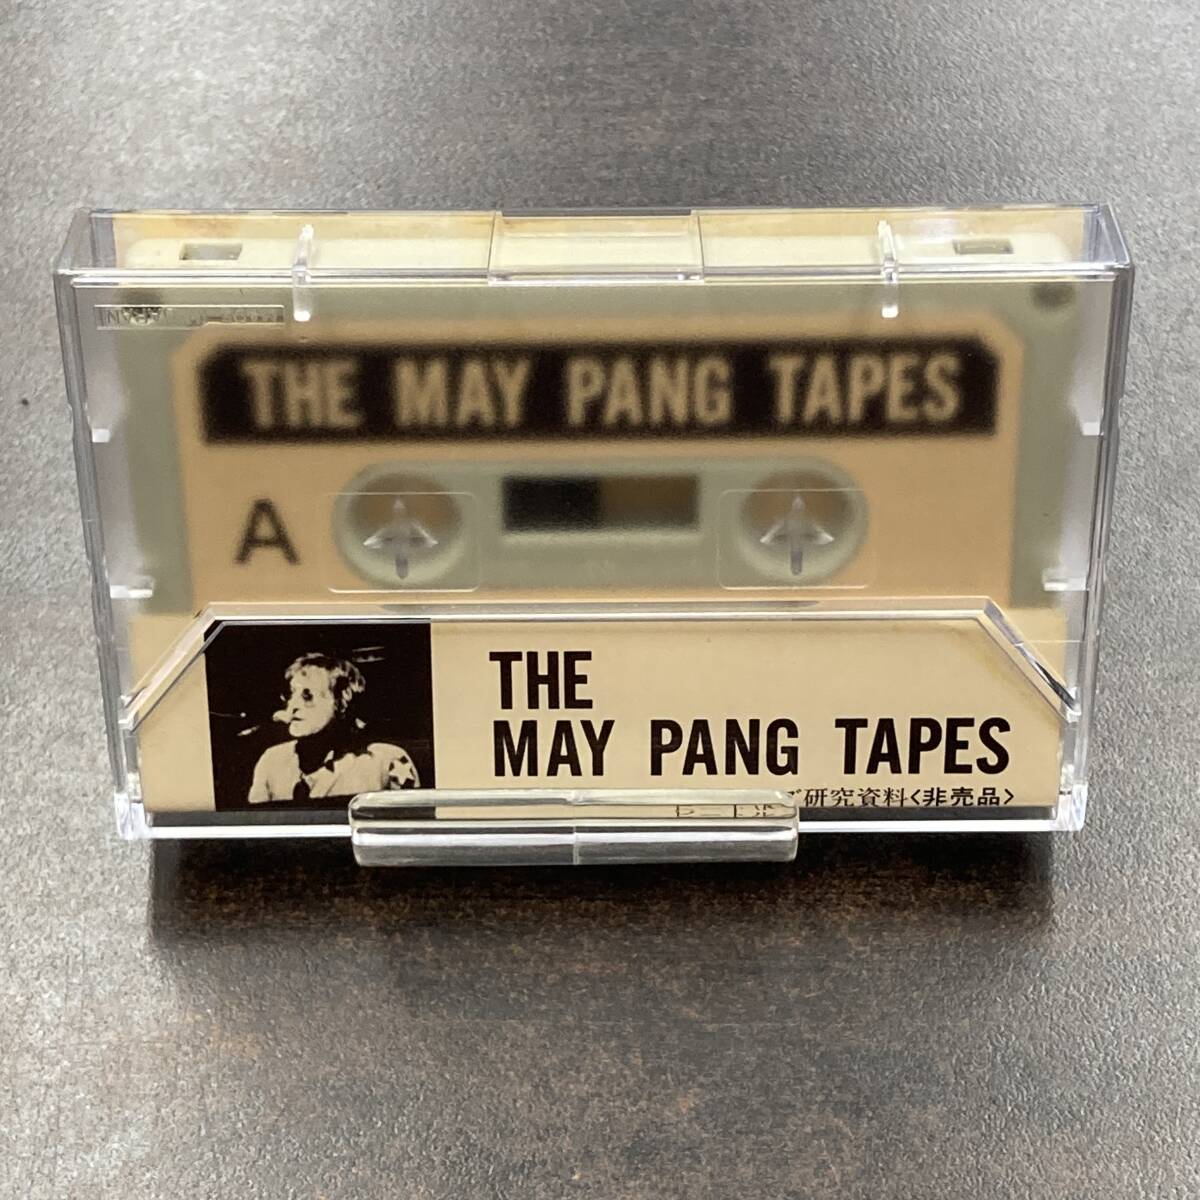 1228Mw ザ・ビートルズ 研究資料 THE MAY PANG TAPES カセットテープ / THE BEATLES Research materials Cassette Tapeの画像5